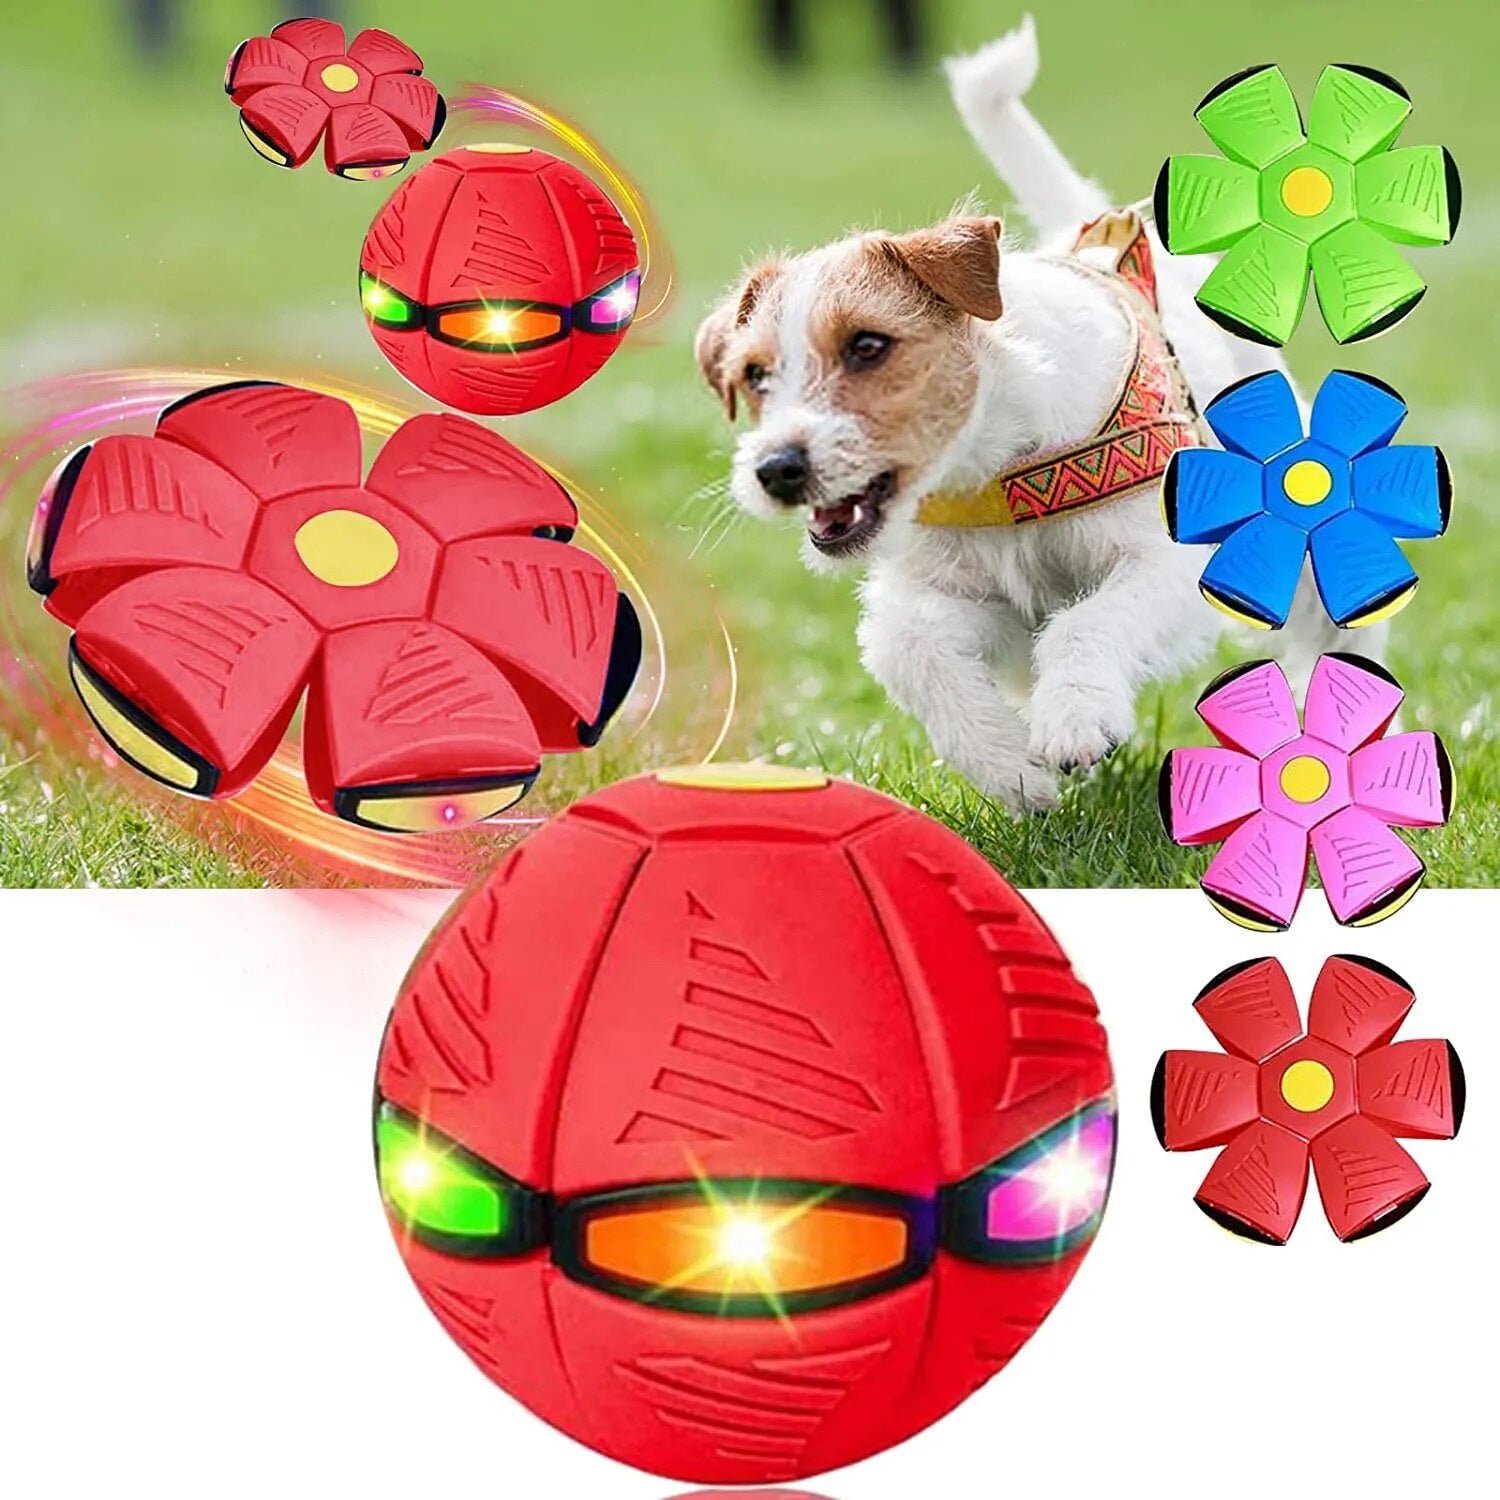 dog toy balls | fetch dog toy | dog light up ball | dog light up balls | squeaky dog toy indestructible | squeaky dog toy noise | dog toy sale | squeaky dog toys for aggressive chewers | best squeaky dog toy | dog toy ball thrower | dog toy ball inside ball | dog toy ball launchers | dog toy ball launcher | nerf light up dog ball